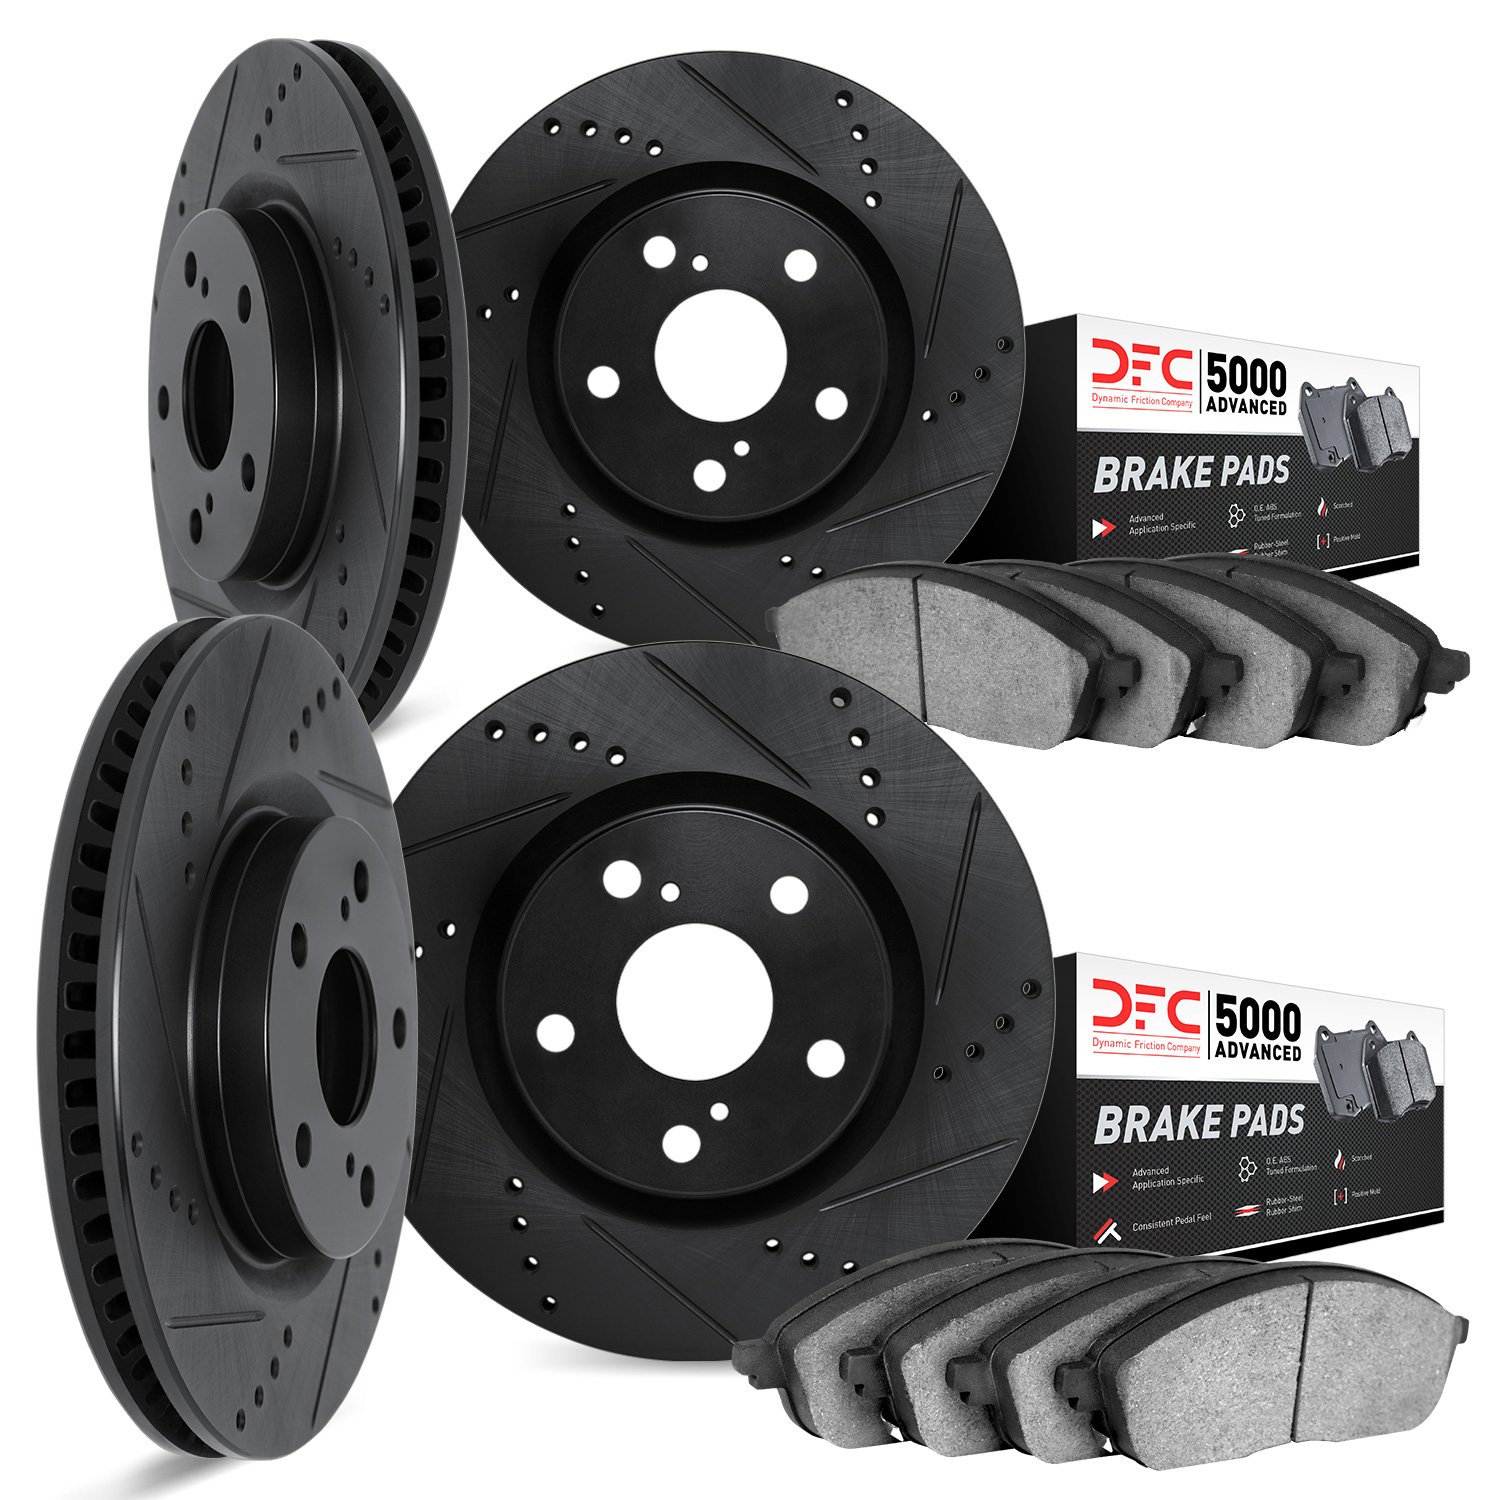 8504-76146 Drilled/Slotted Brake Rotors w/5000 Advanced Brake Pads Kit [Black], 1993-1998 Lexus/Toyota/Scion, Position: Front an